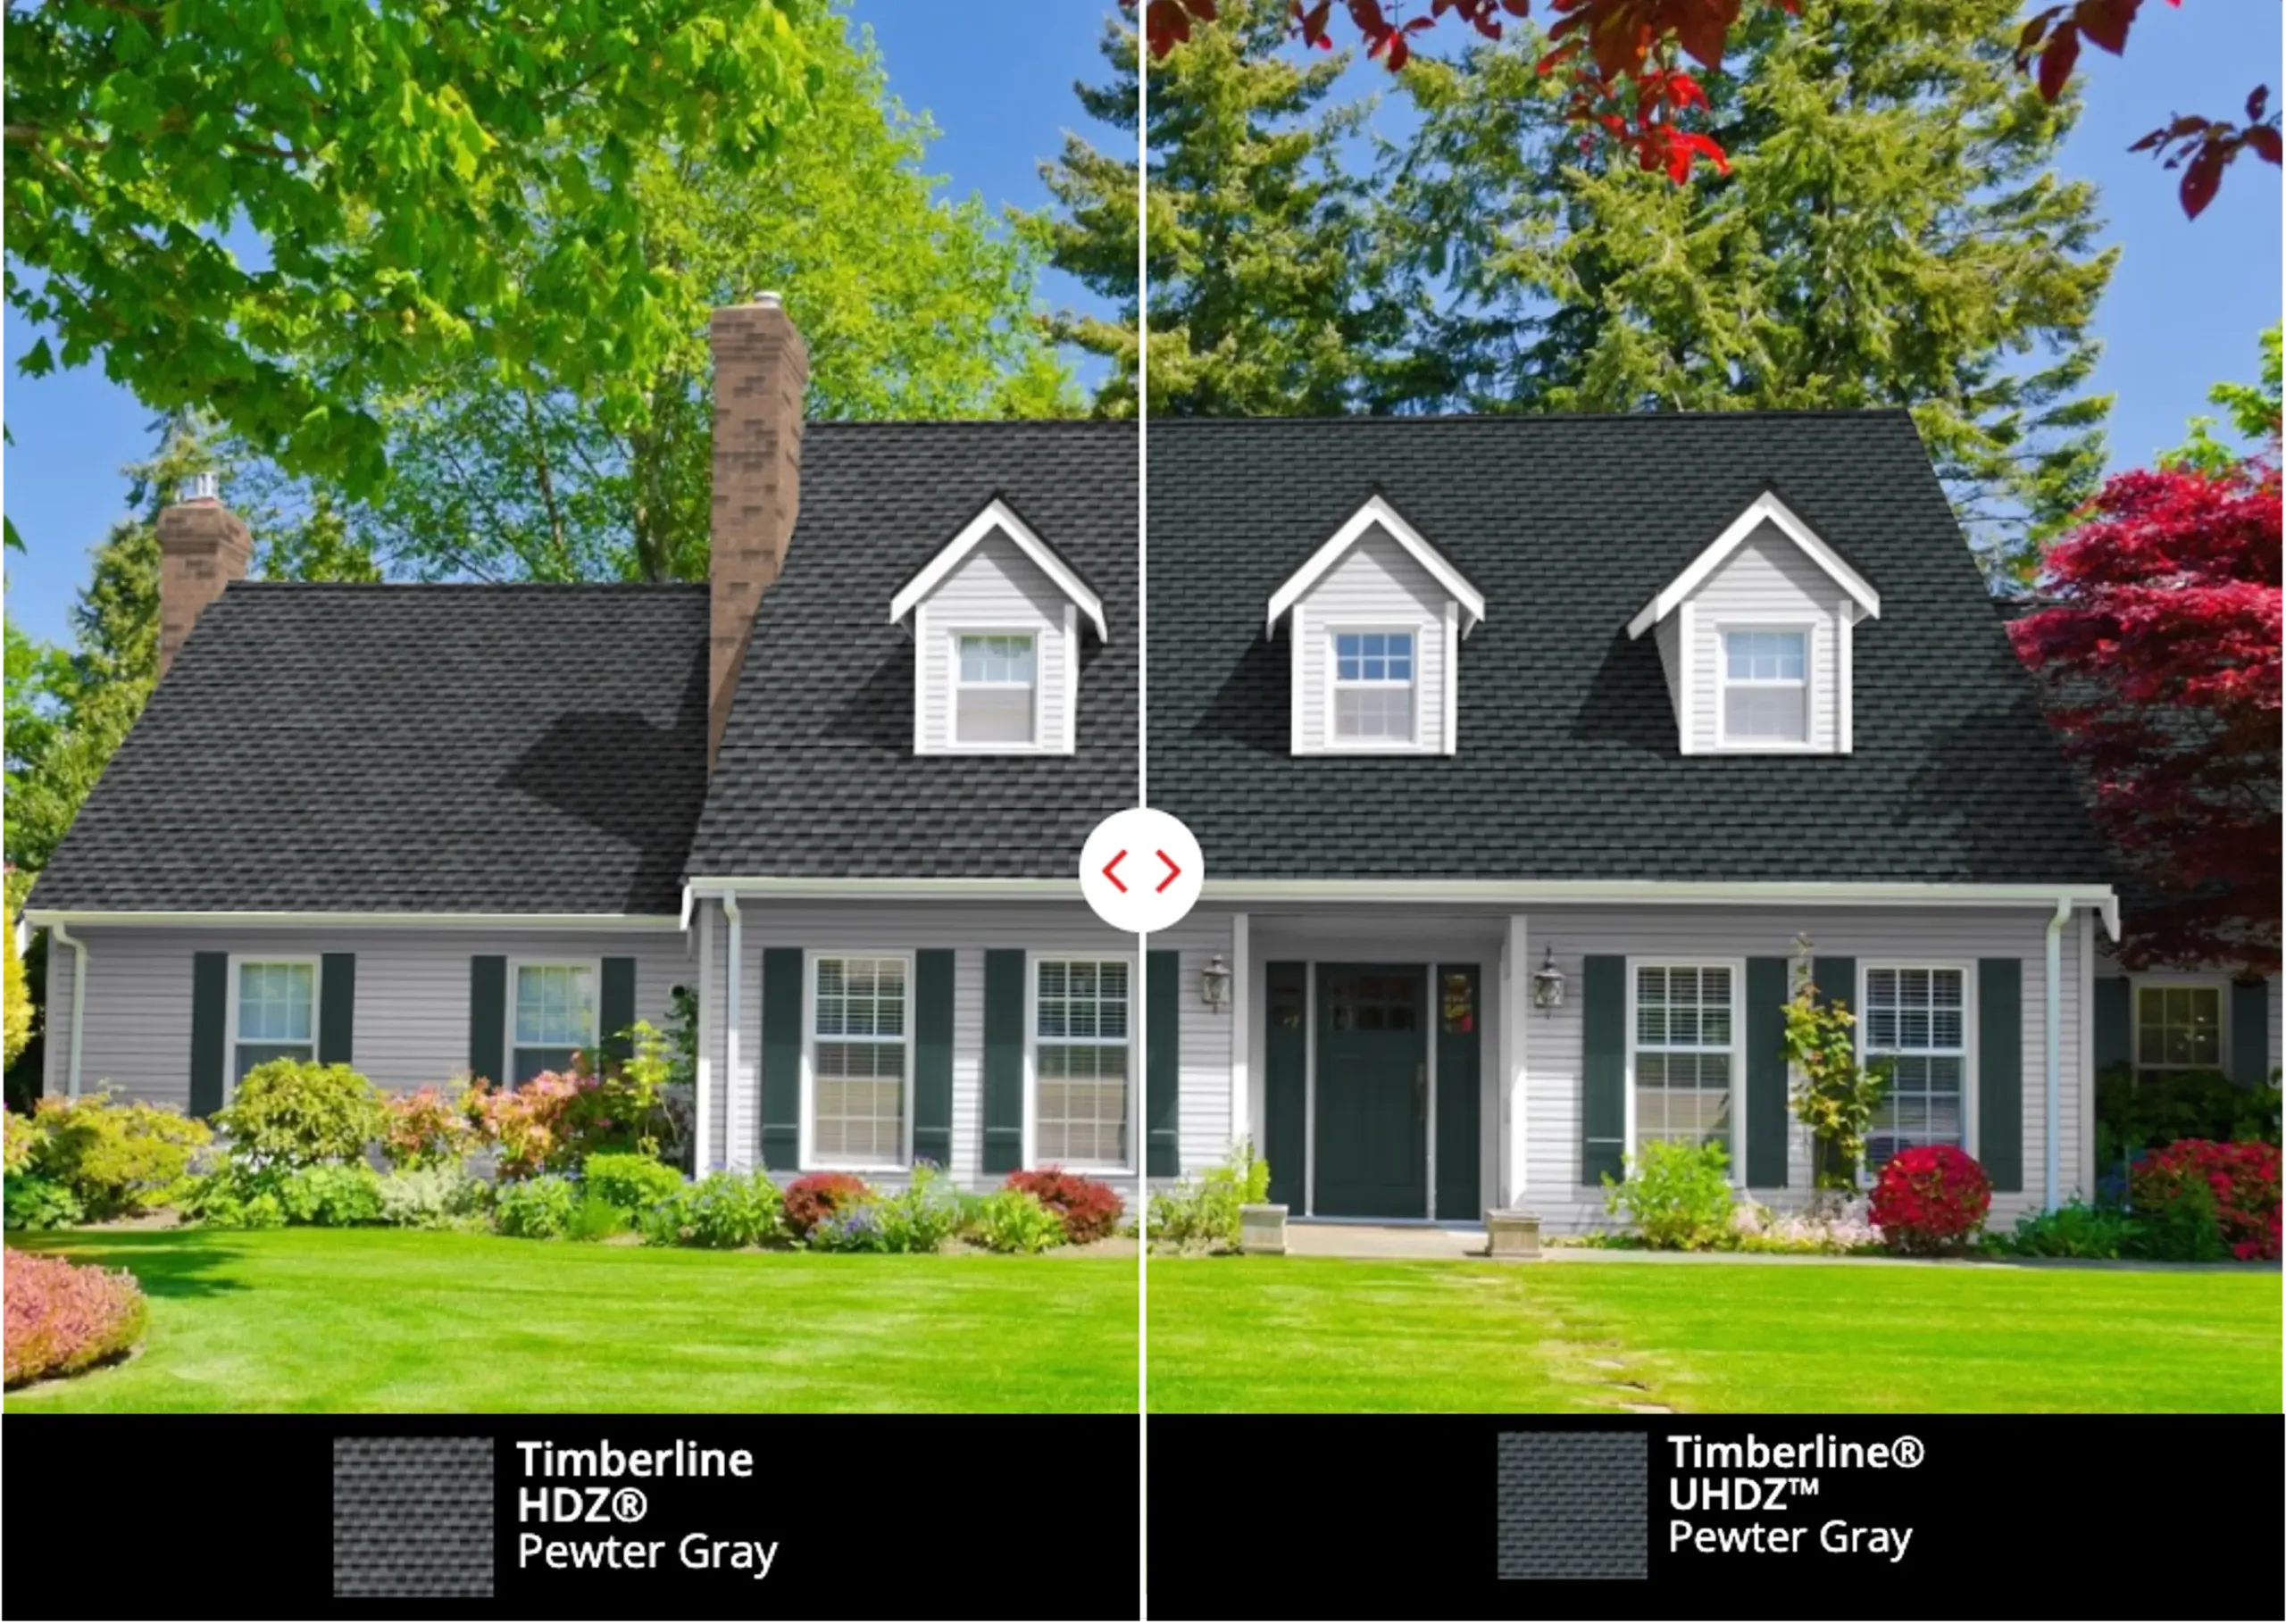 Comparison of Timberline HDZ and UHDZ shingles on same house, showcasing the differences in shingle appearance and design